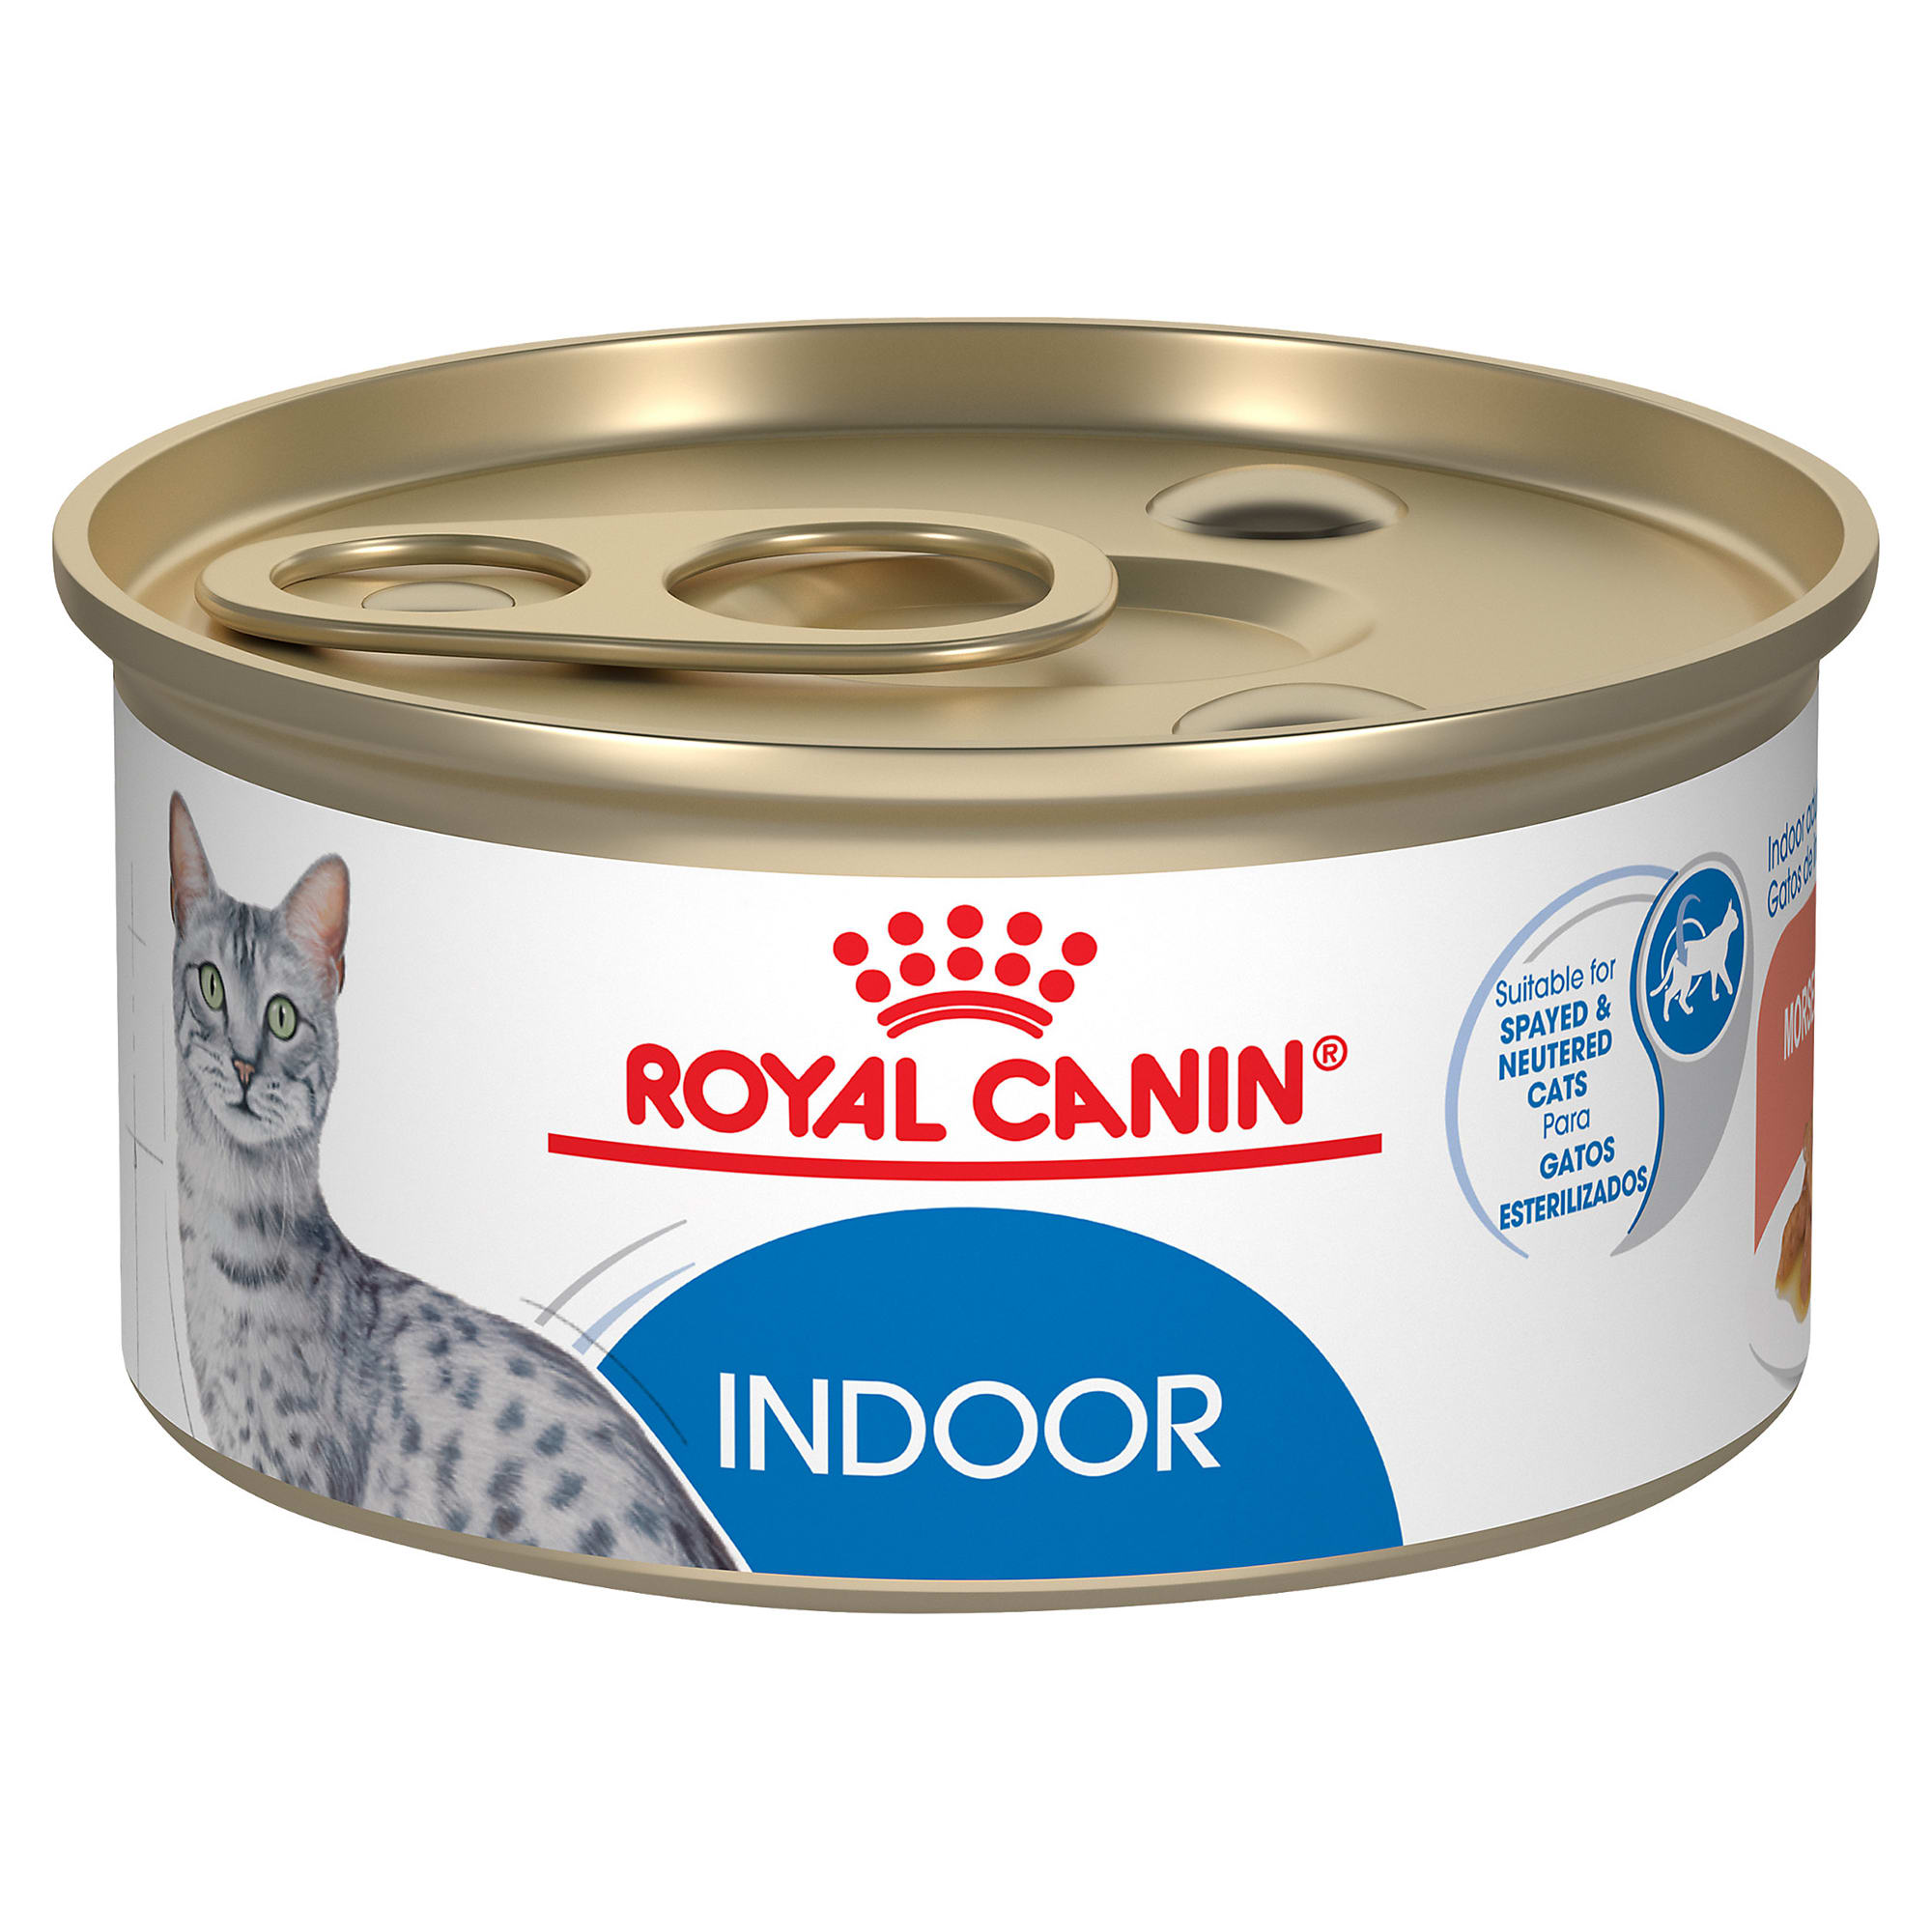 Royal Canin Adult Feline Health Nutrition Morsels in Gravy Cat Food for Indoor Cats, 3 oz., Case of 24, 24 X 3 OZ